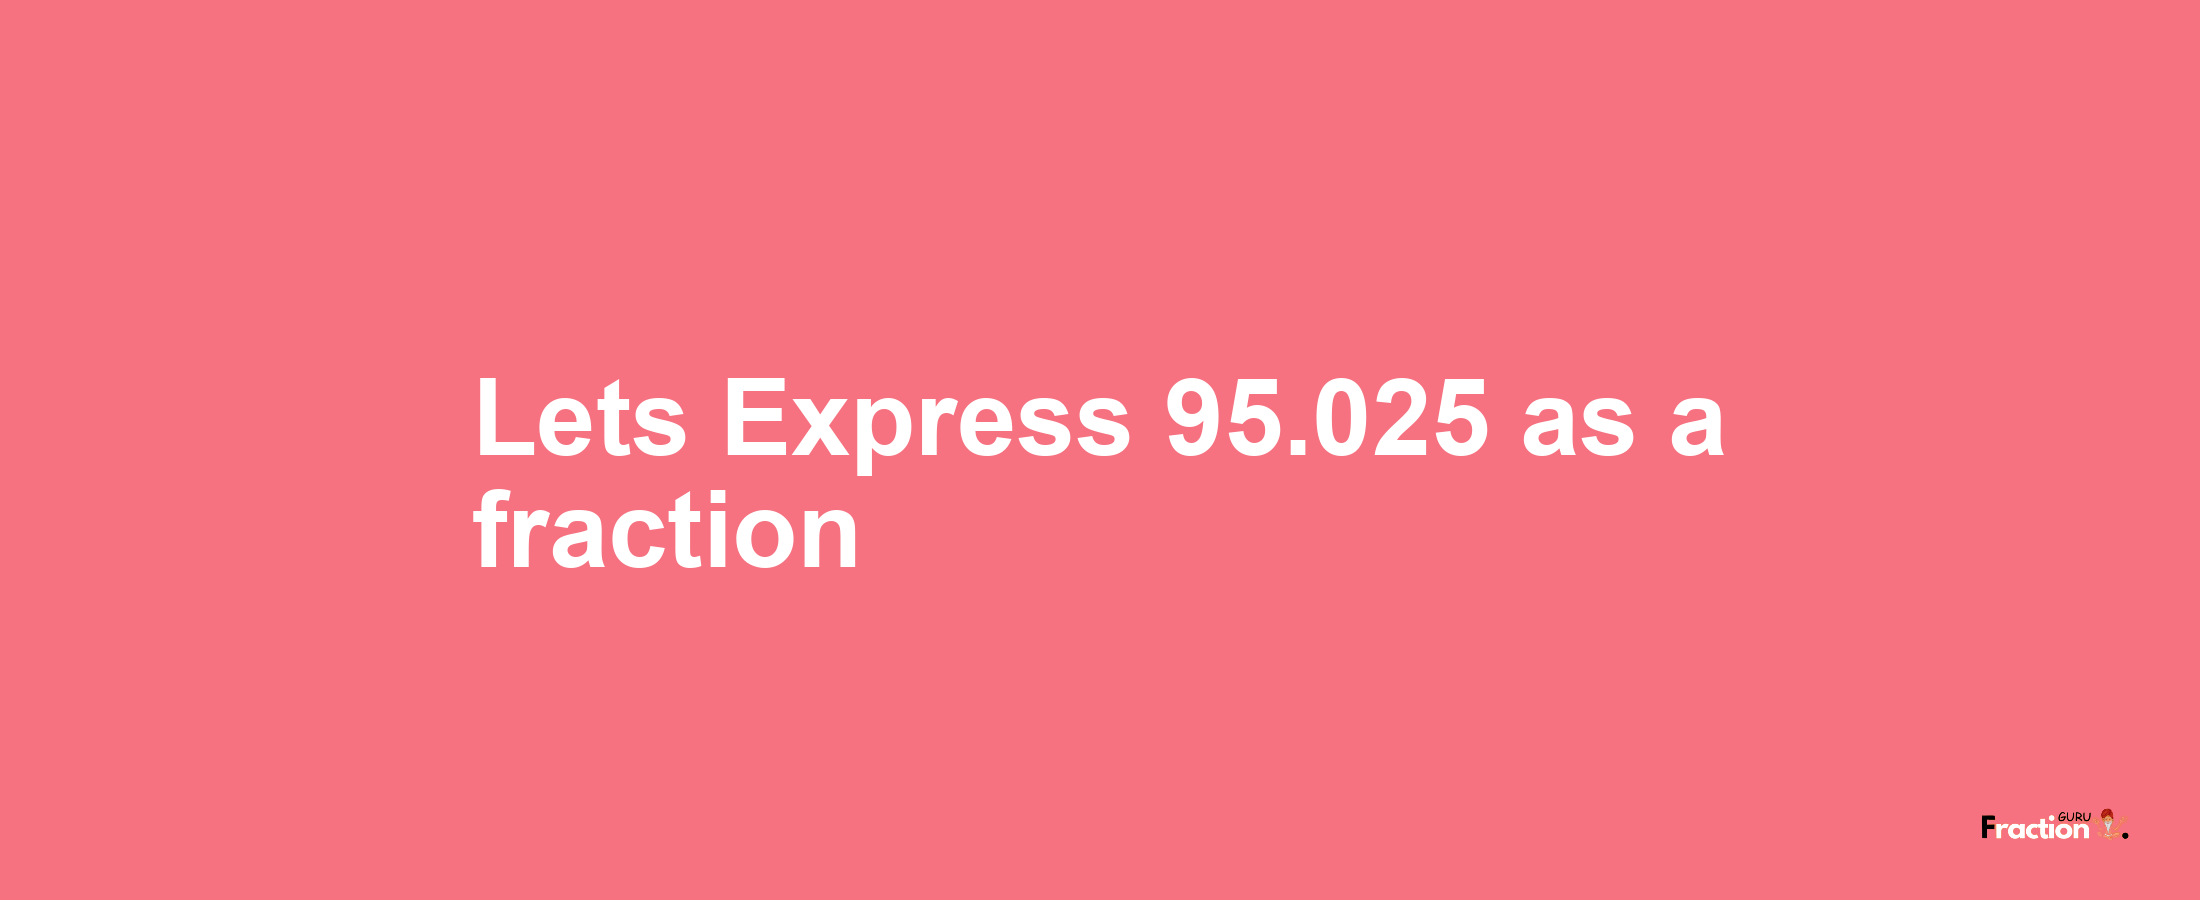 Lets Express 95.025 as afraction